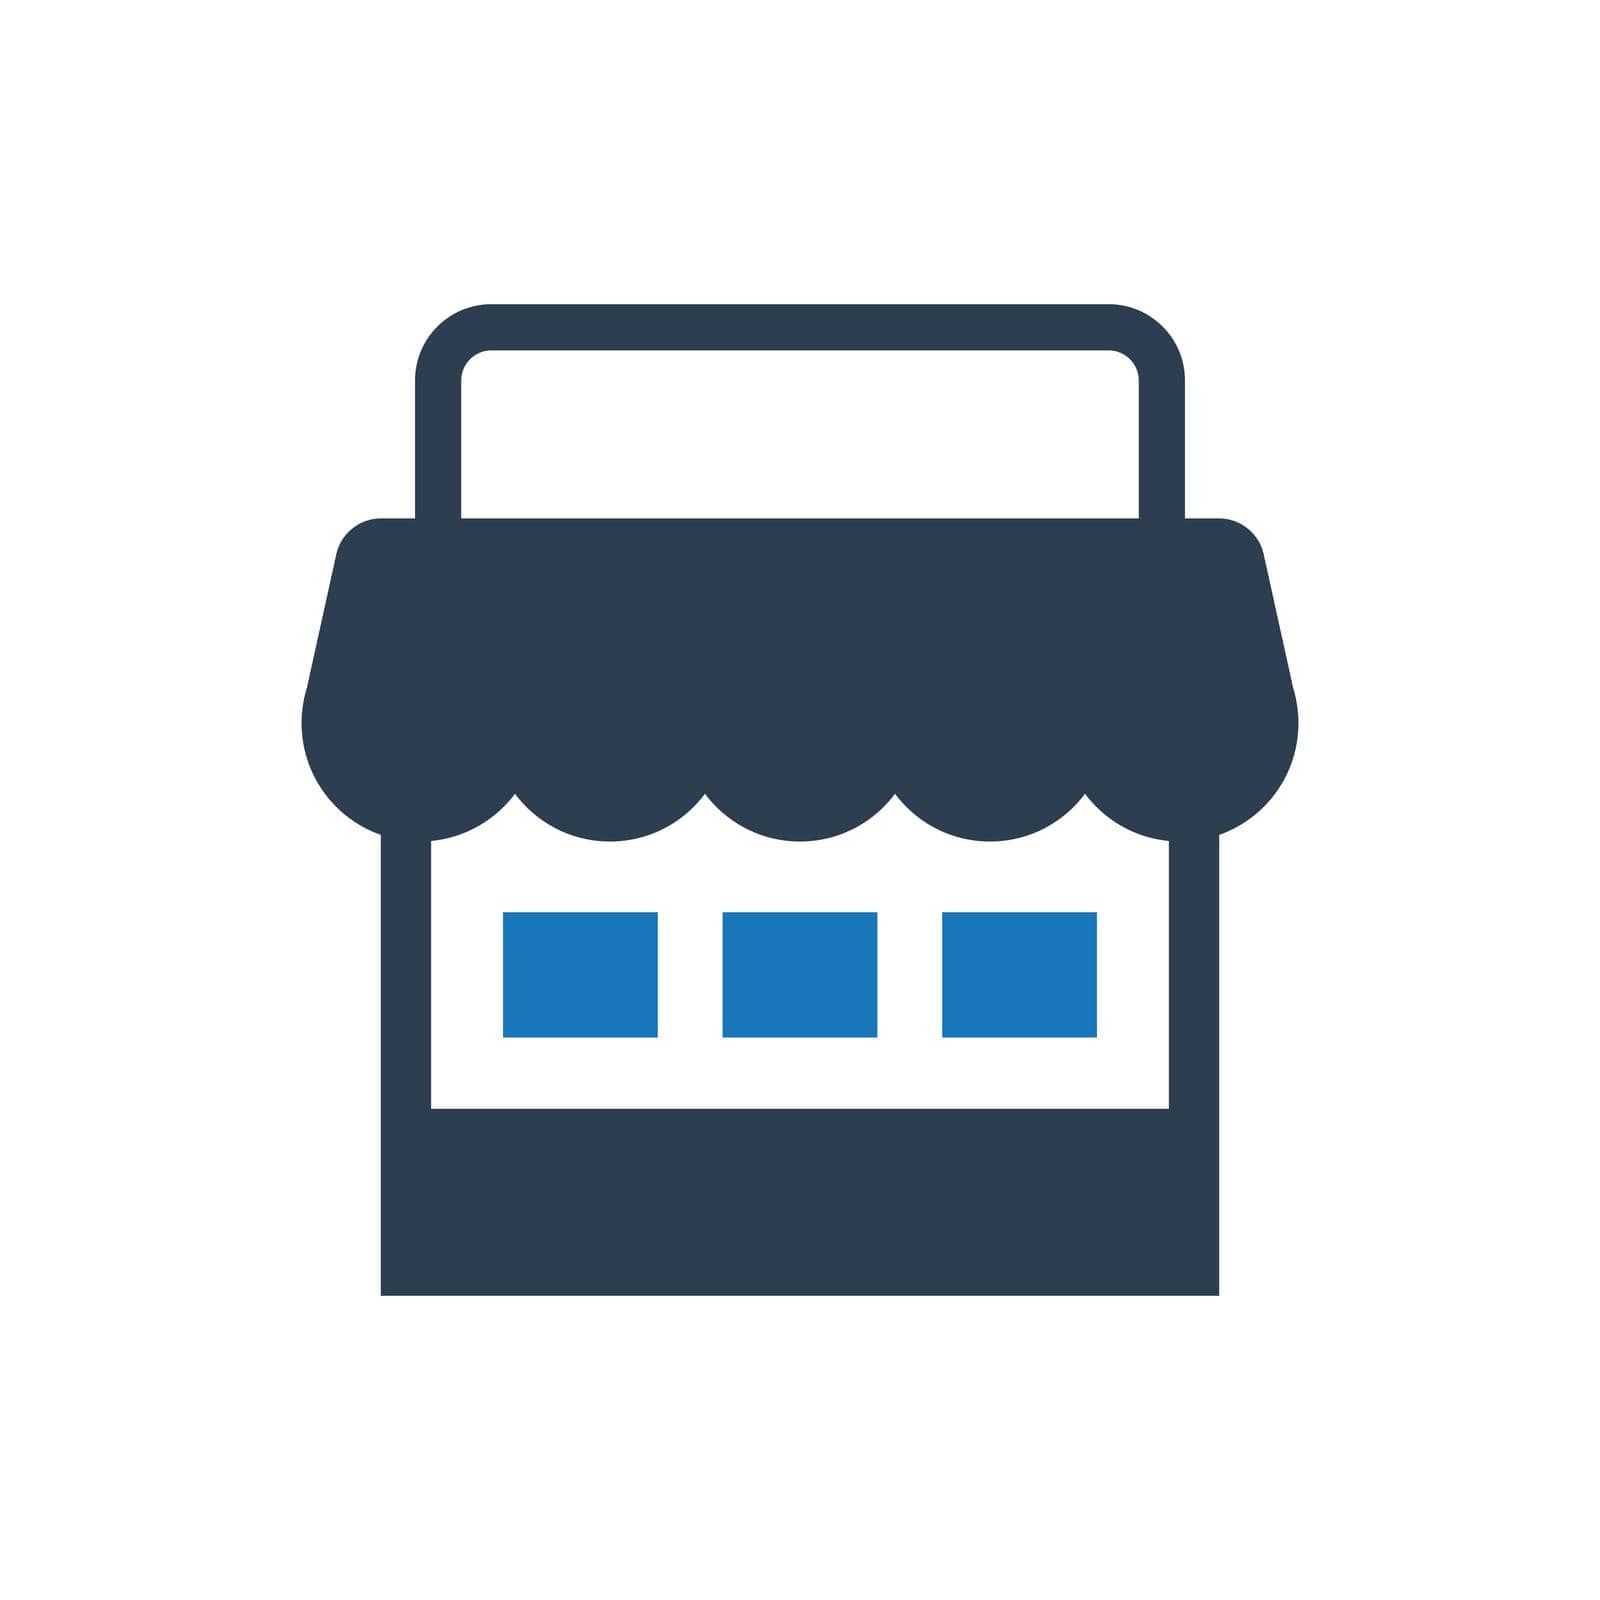 Store Front icon. Vector EPS file.